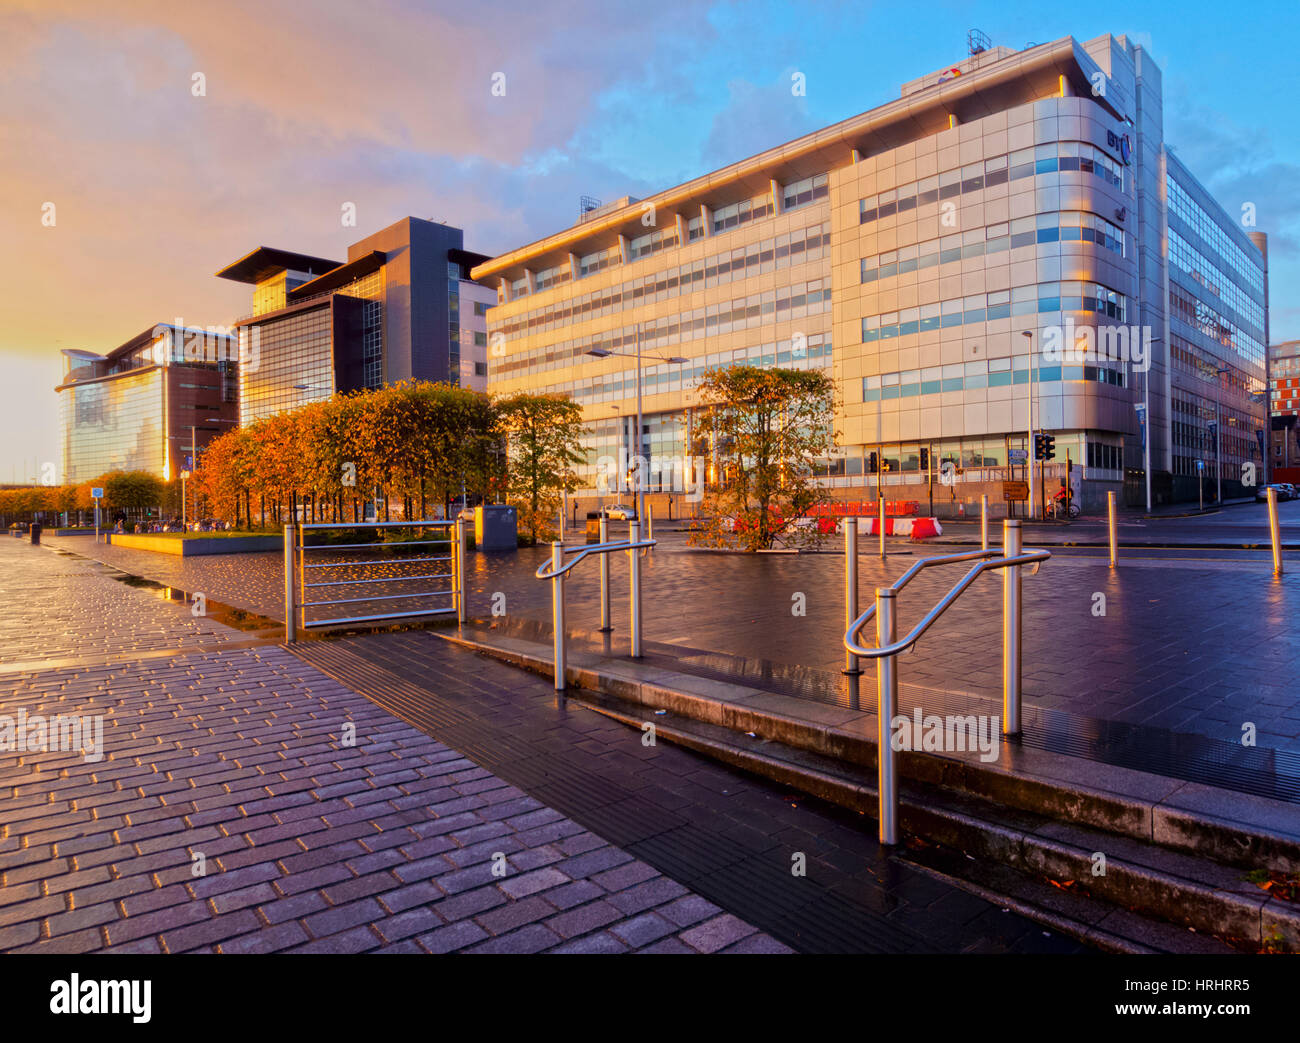 View of the Alexander Bain House and the Scottish Government buildings at sunset, Glasgow, Scotland, United Kingdom Stock Photo